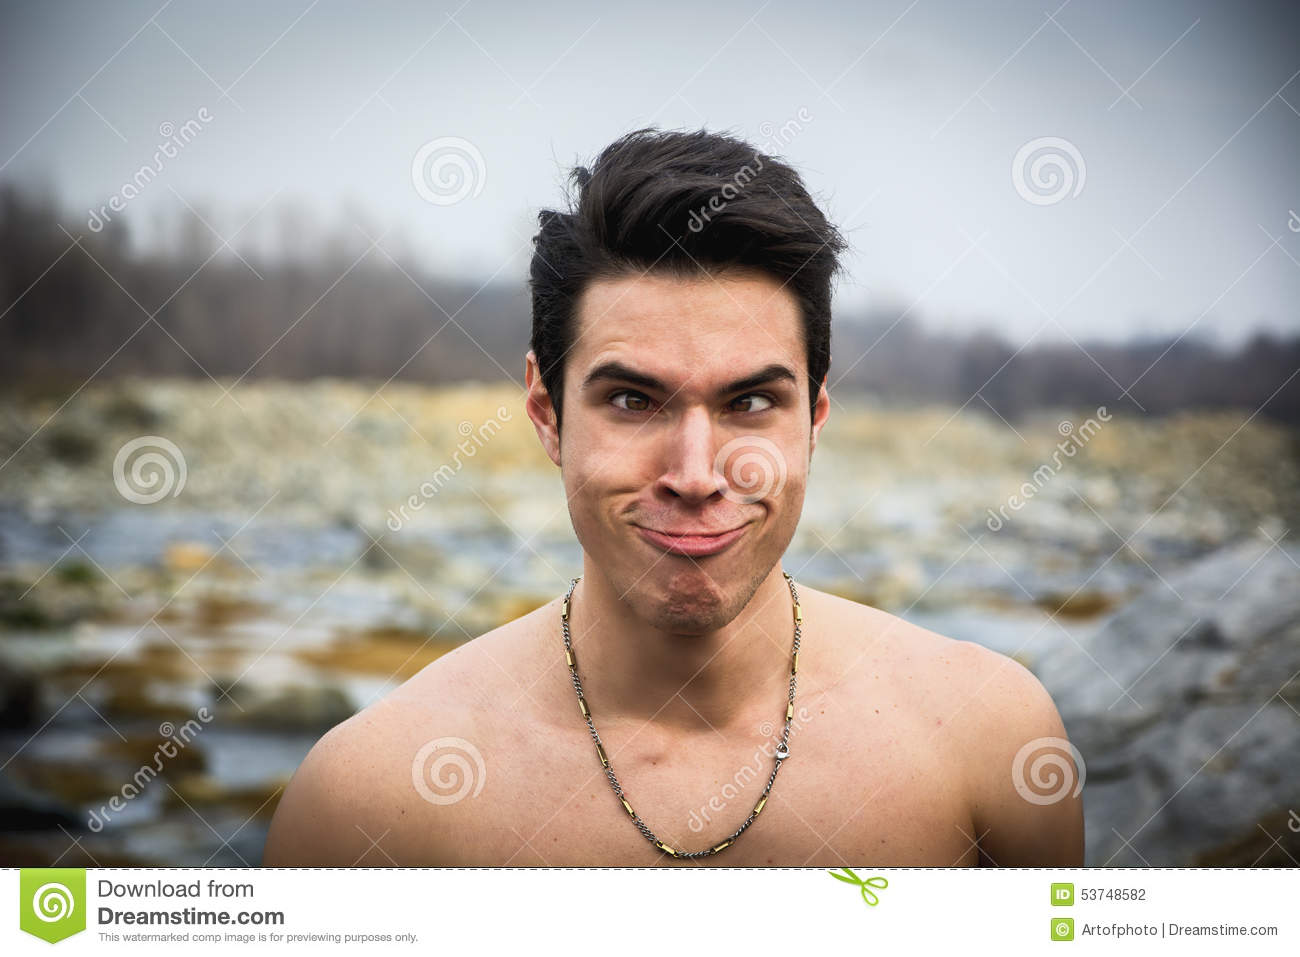 Man Outdoor Doing Silly Face And Stupid Expression Looking At Camera